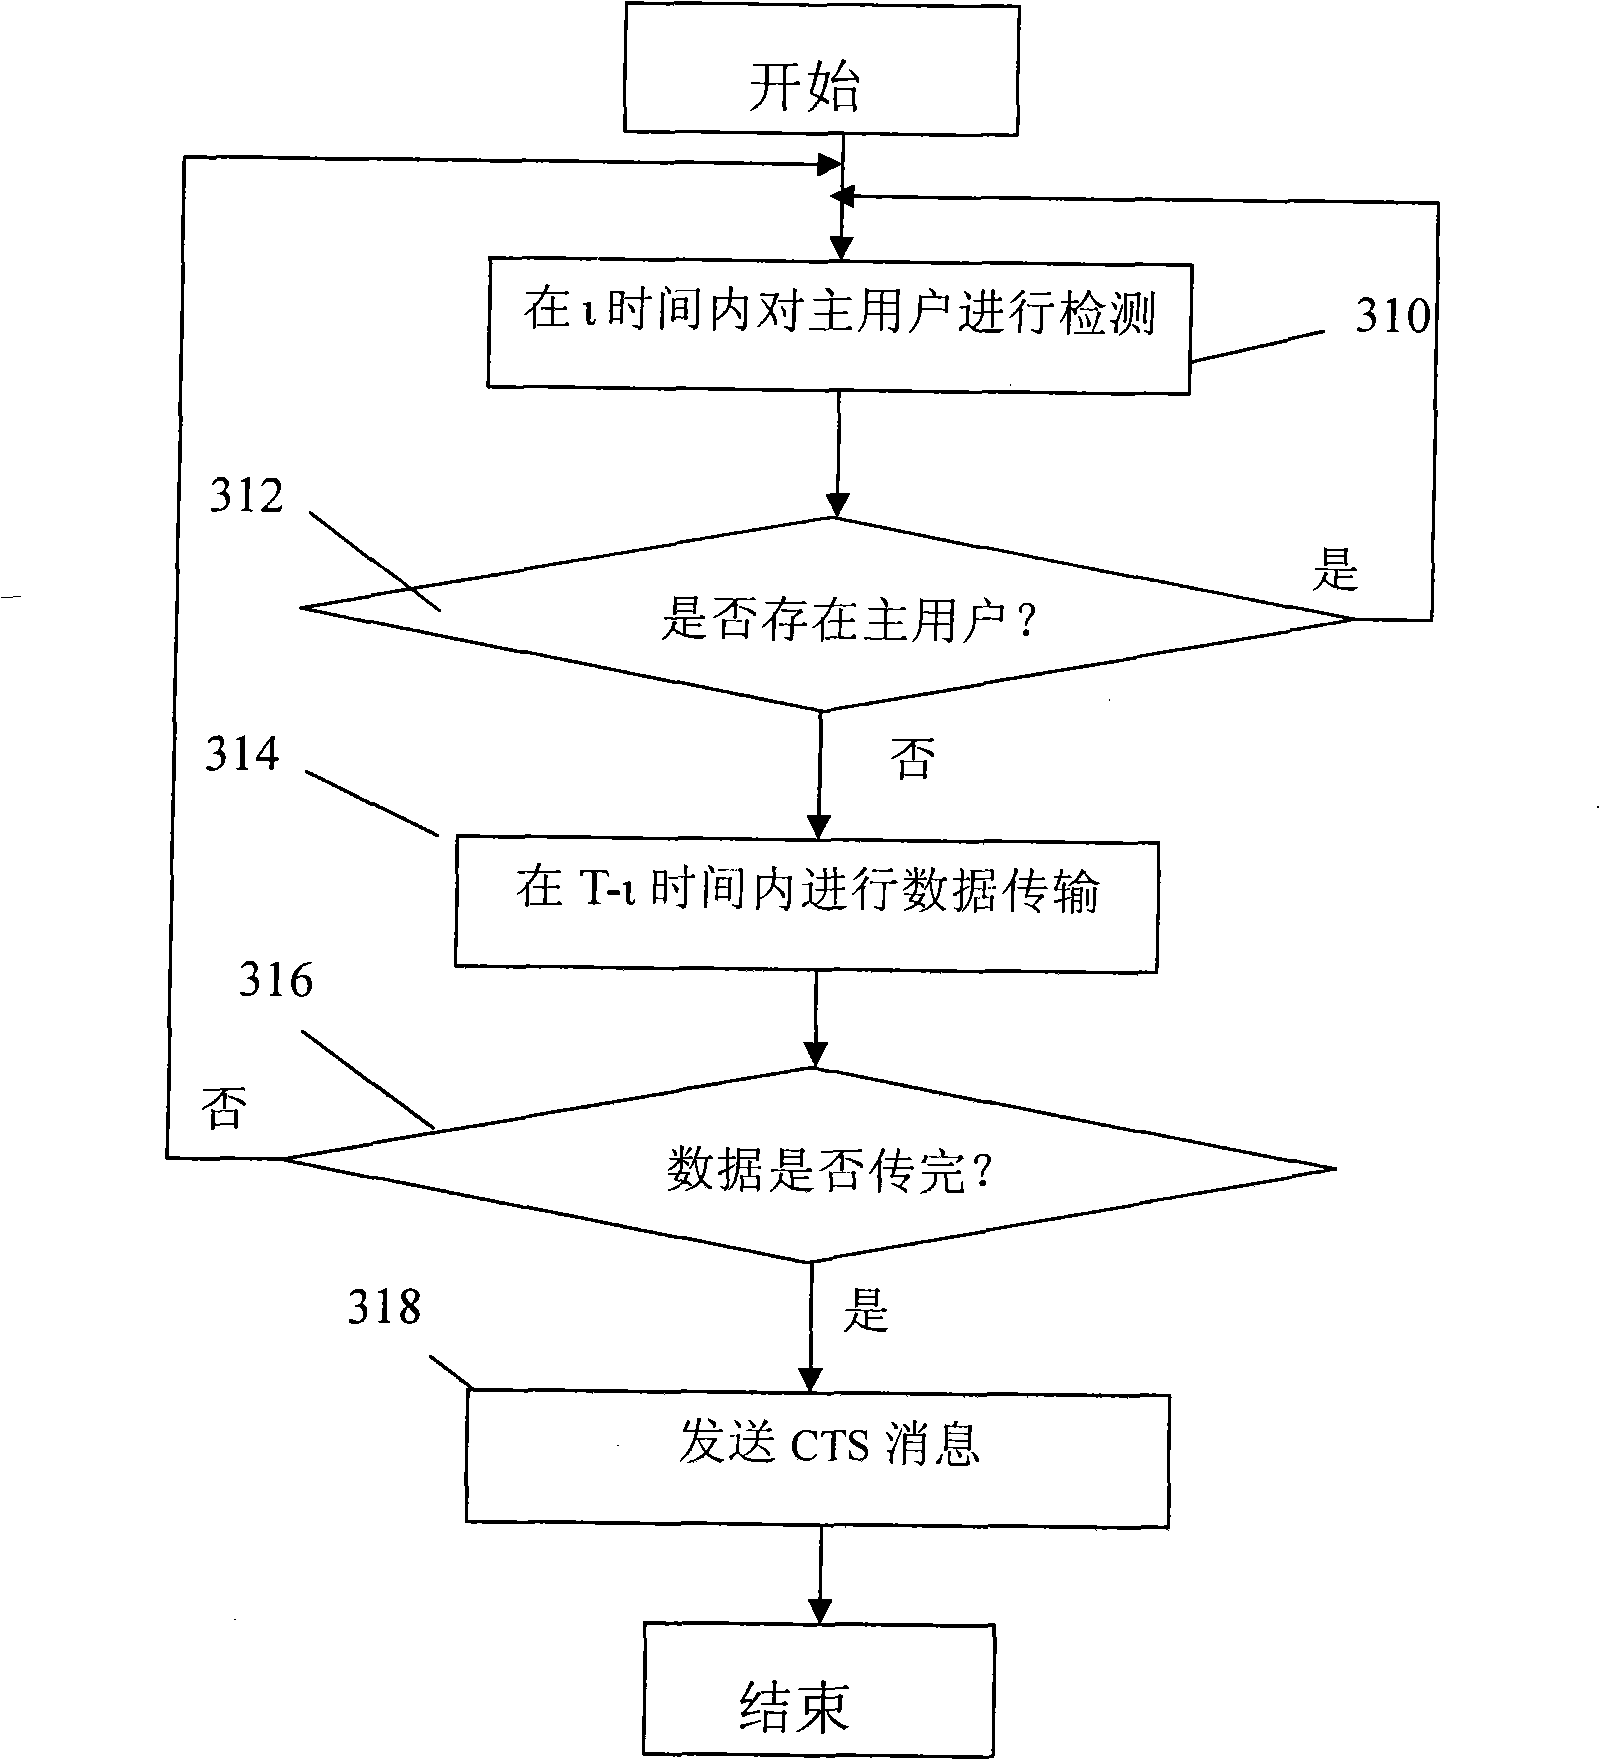 Method for detecting cognitive user in opportunity spectrum sharing system